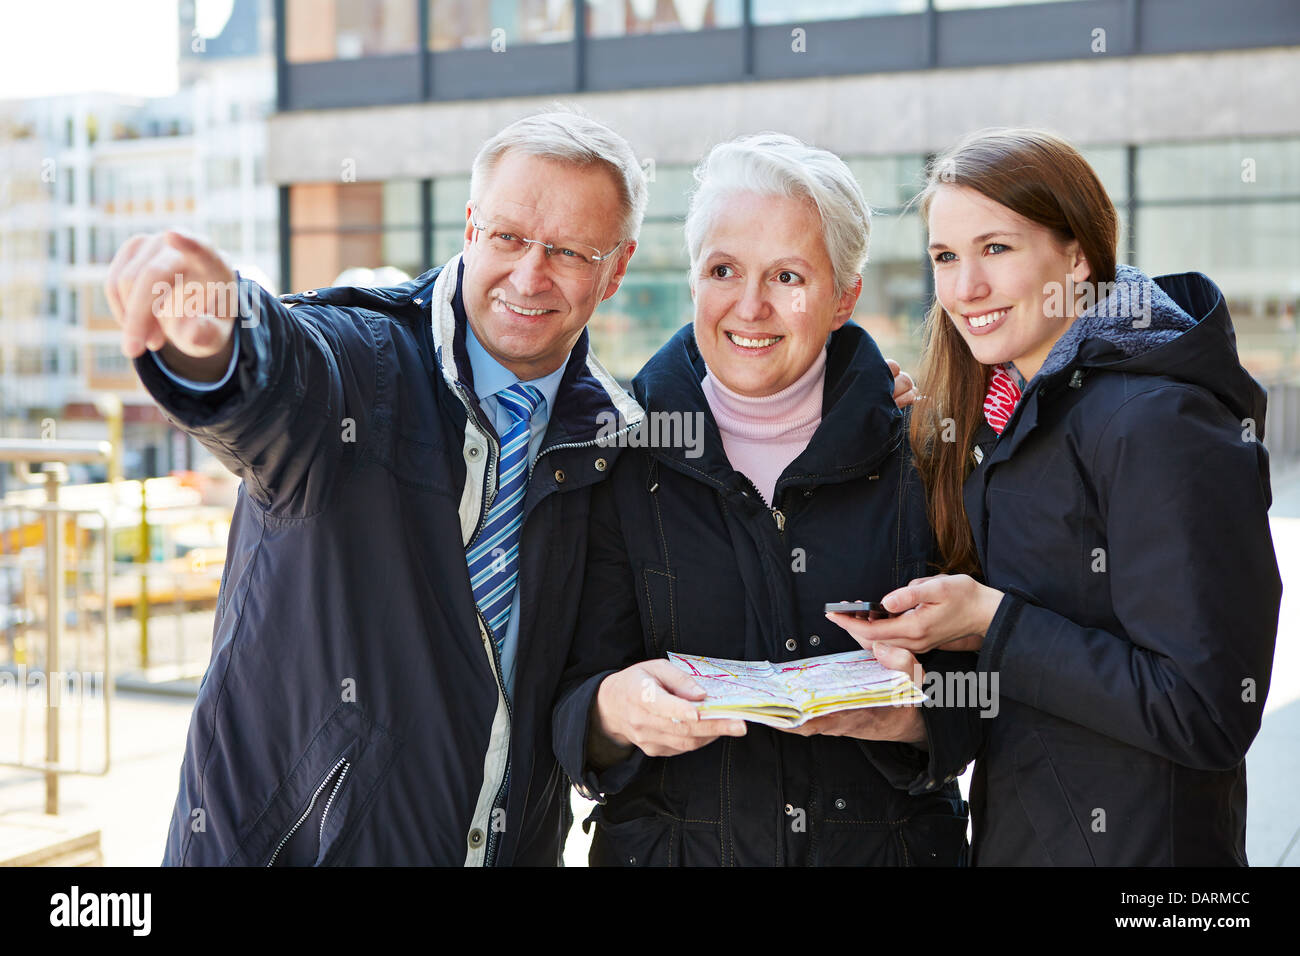 Family with map on sightseeing tour on a city trip Stock Photo